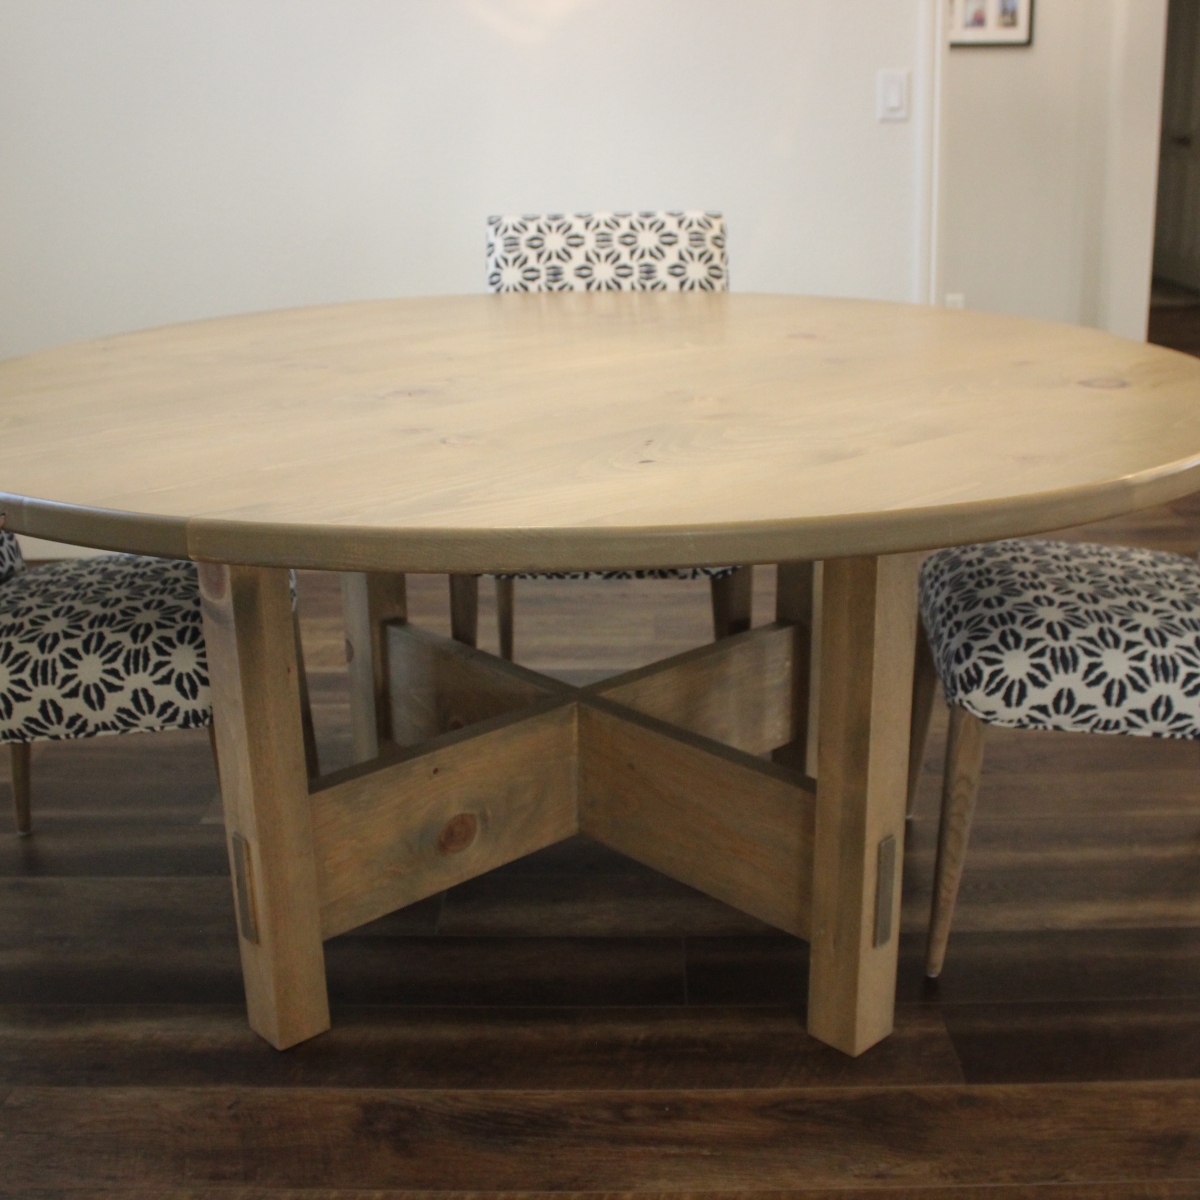 Round & Rustic: The DIY Dining Table To Step-up Your Woodworking Skills